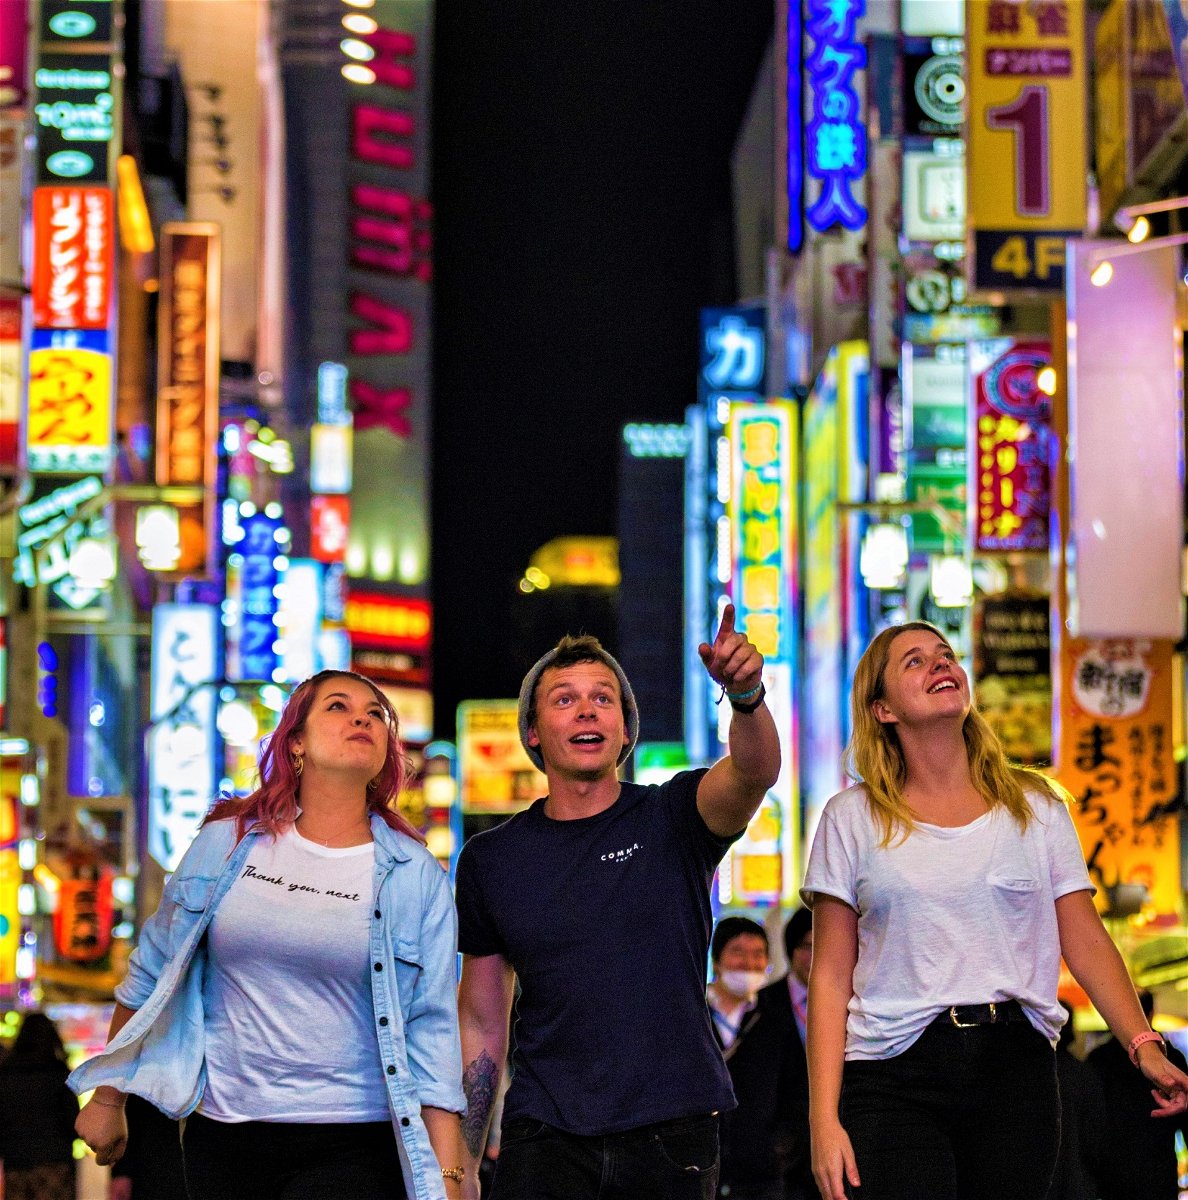 Explore Tokyo with your group!